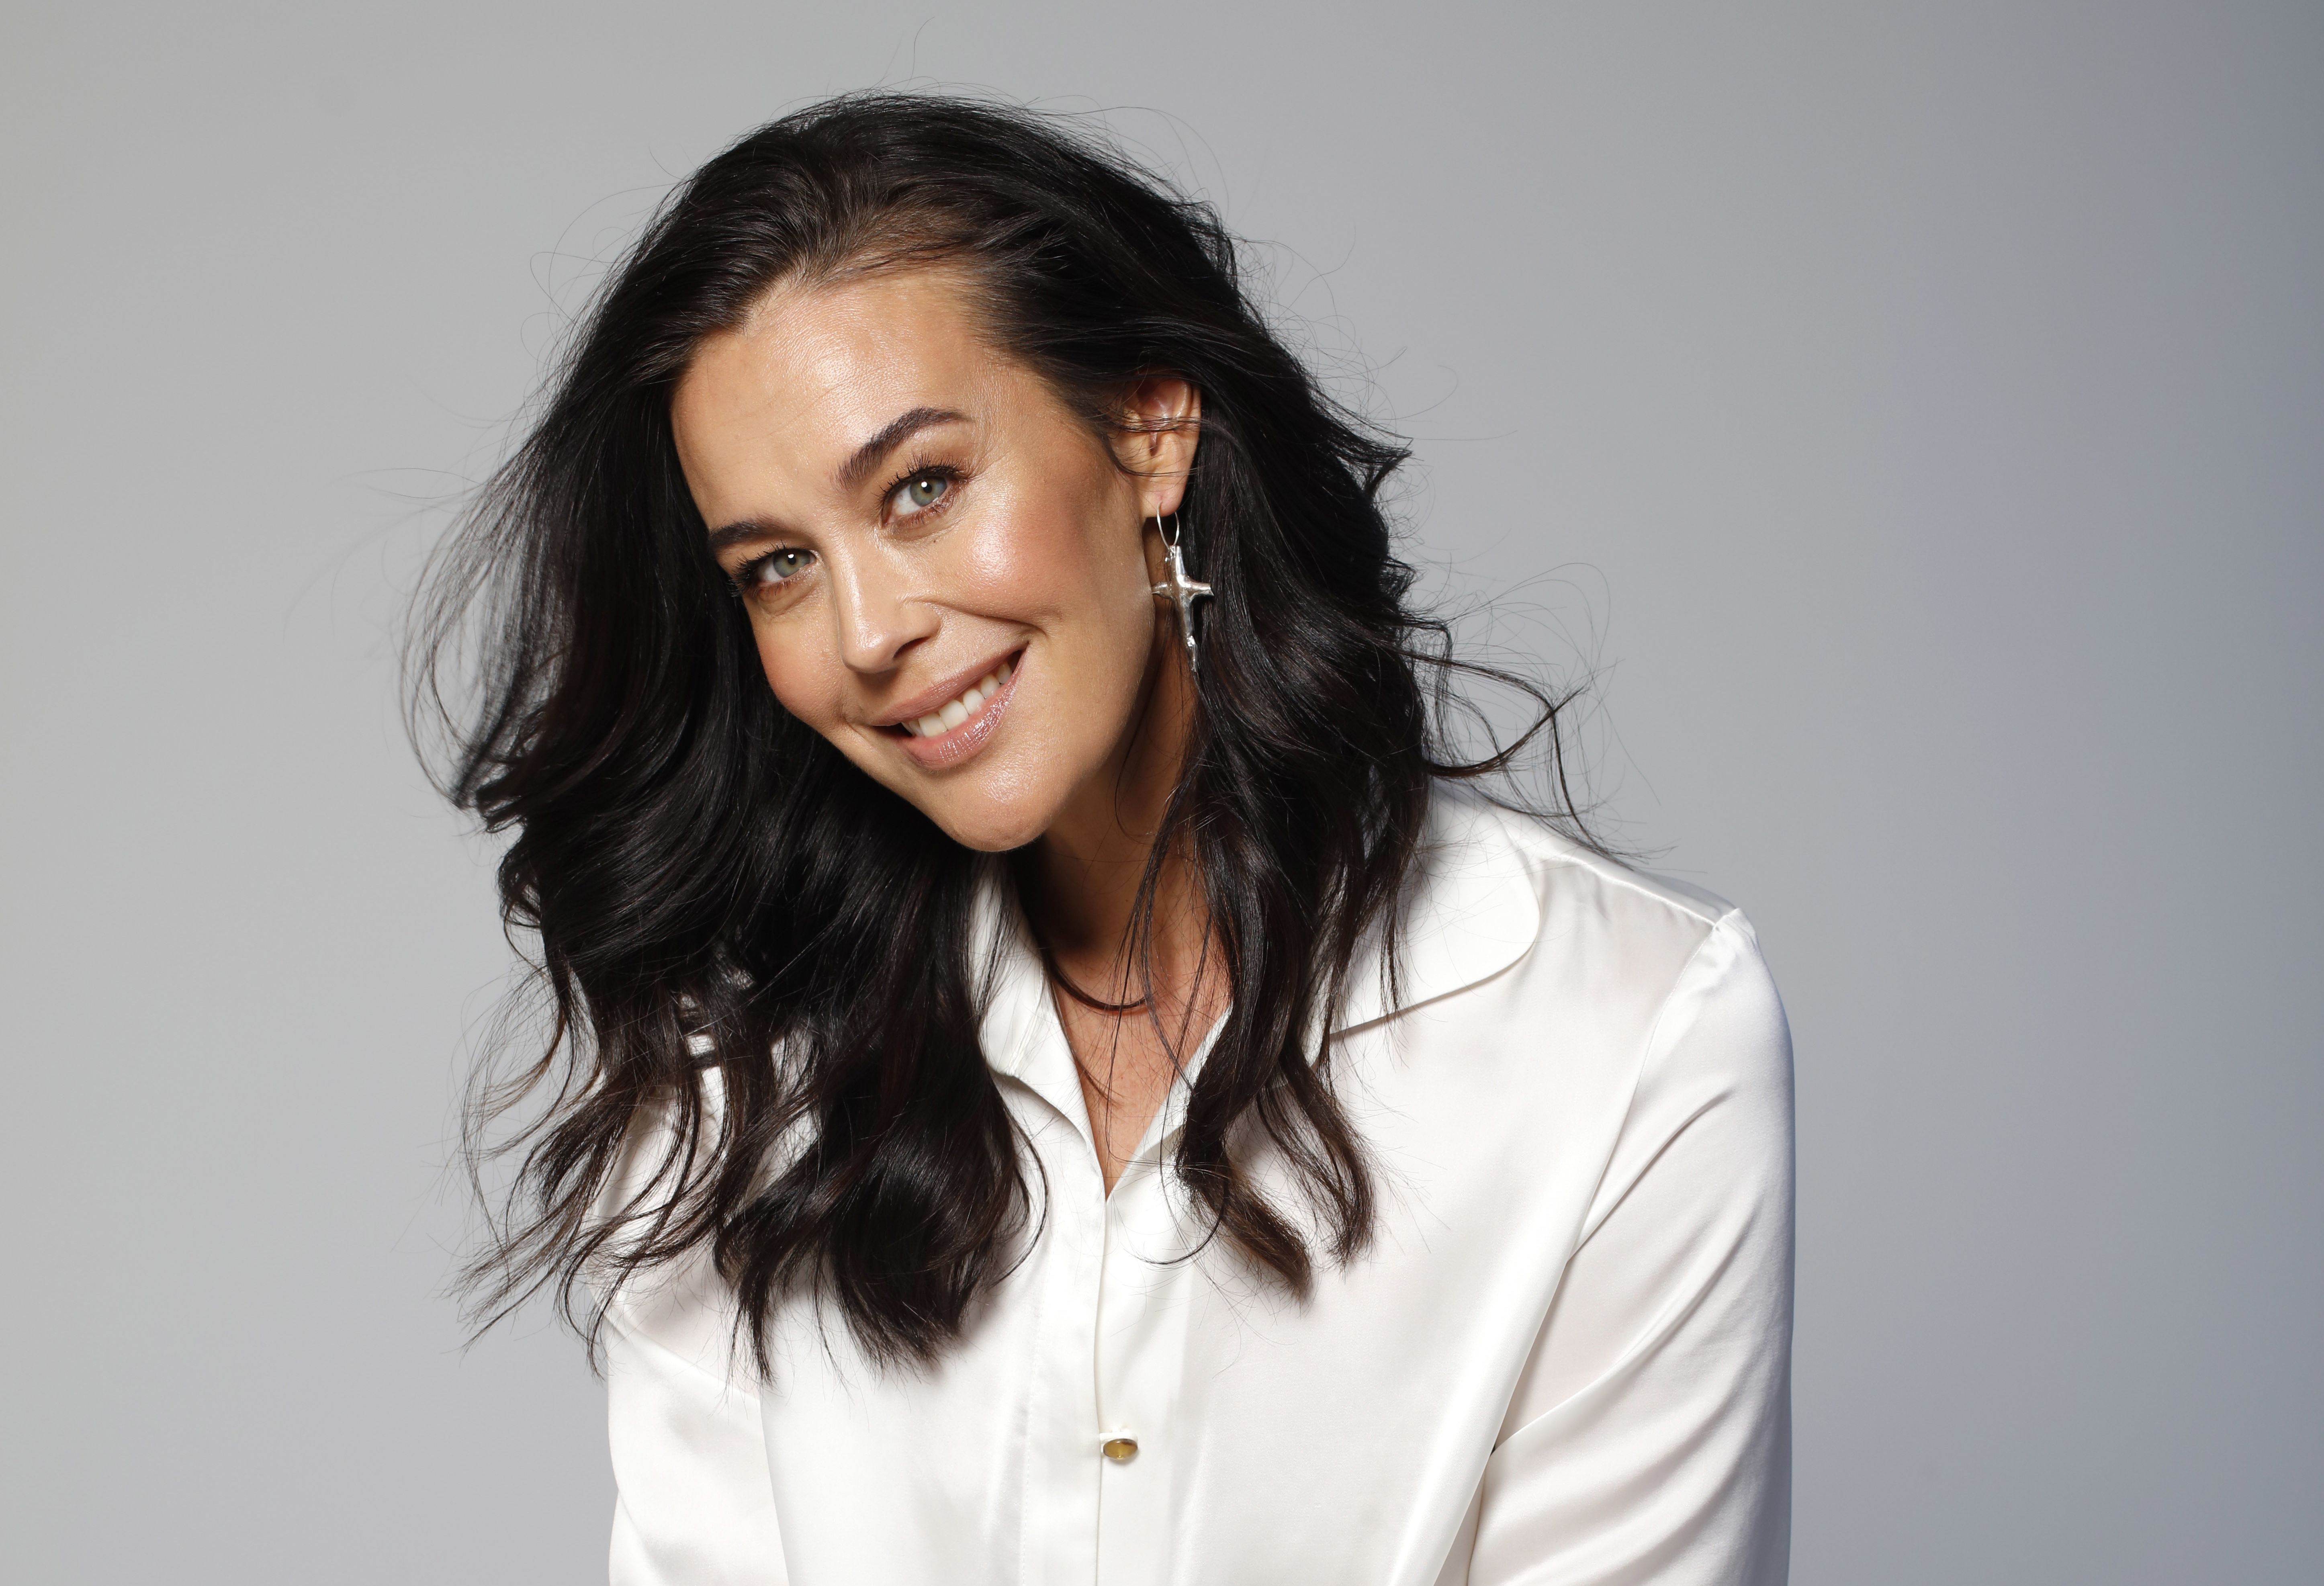 Megan Gale on her mother's words of wisdom that inspired her new business